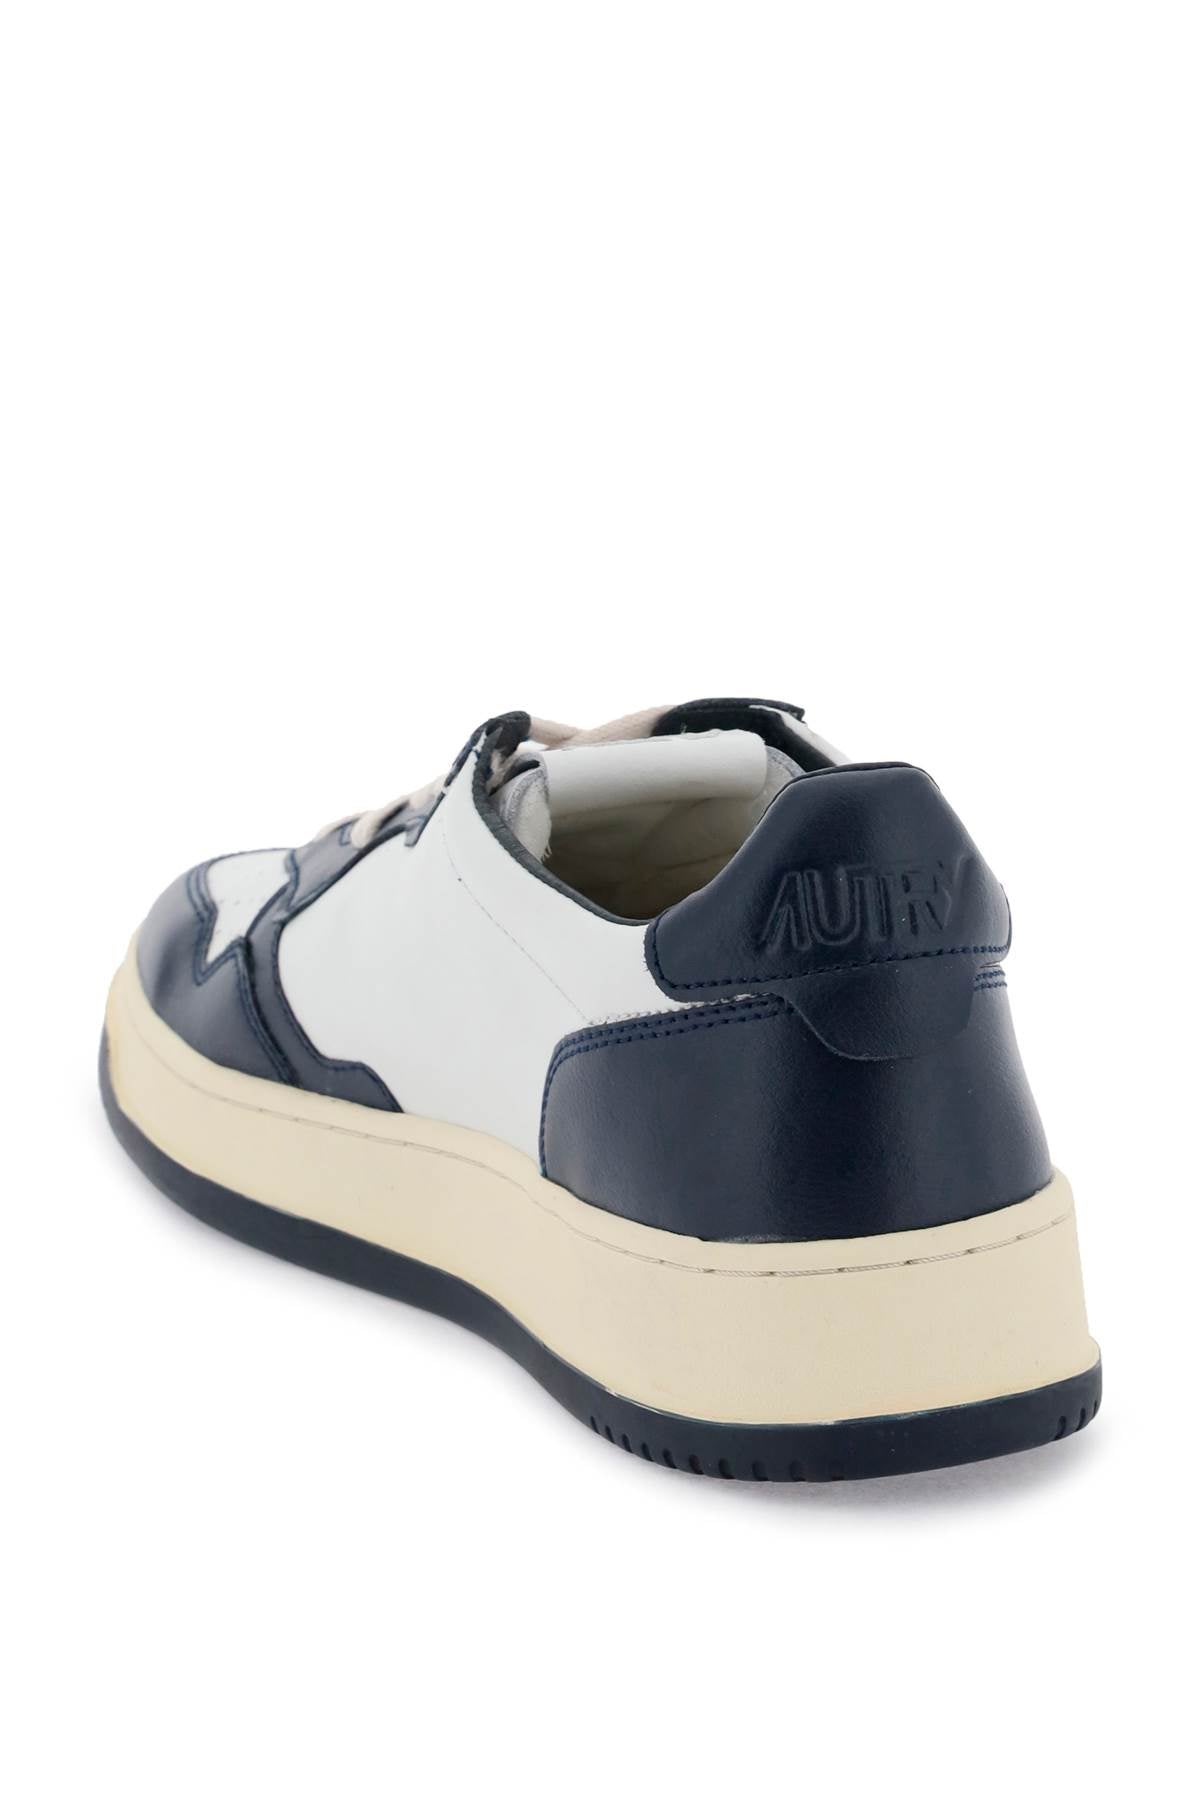 AUTRY leather medalist low sneakers AULMWB04WHTBL